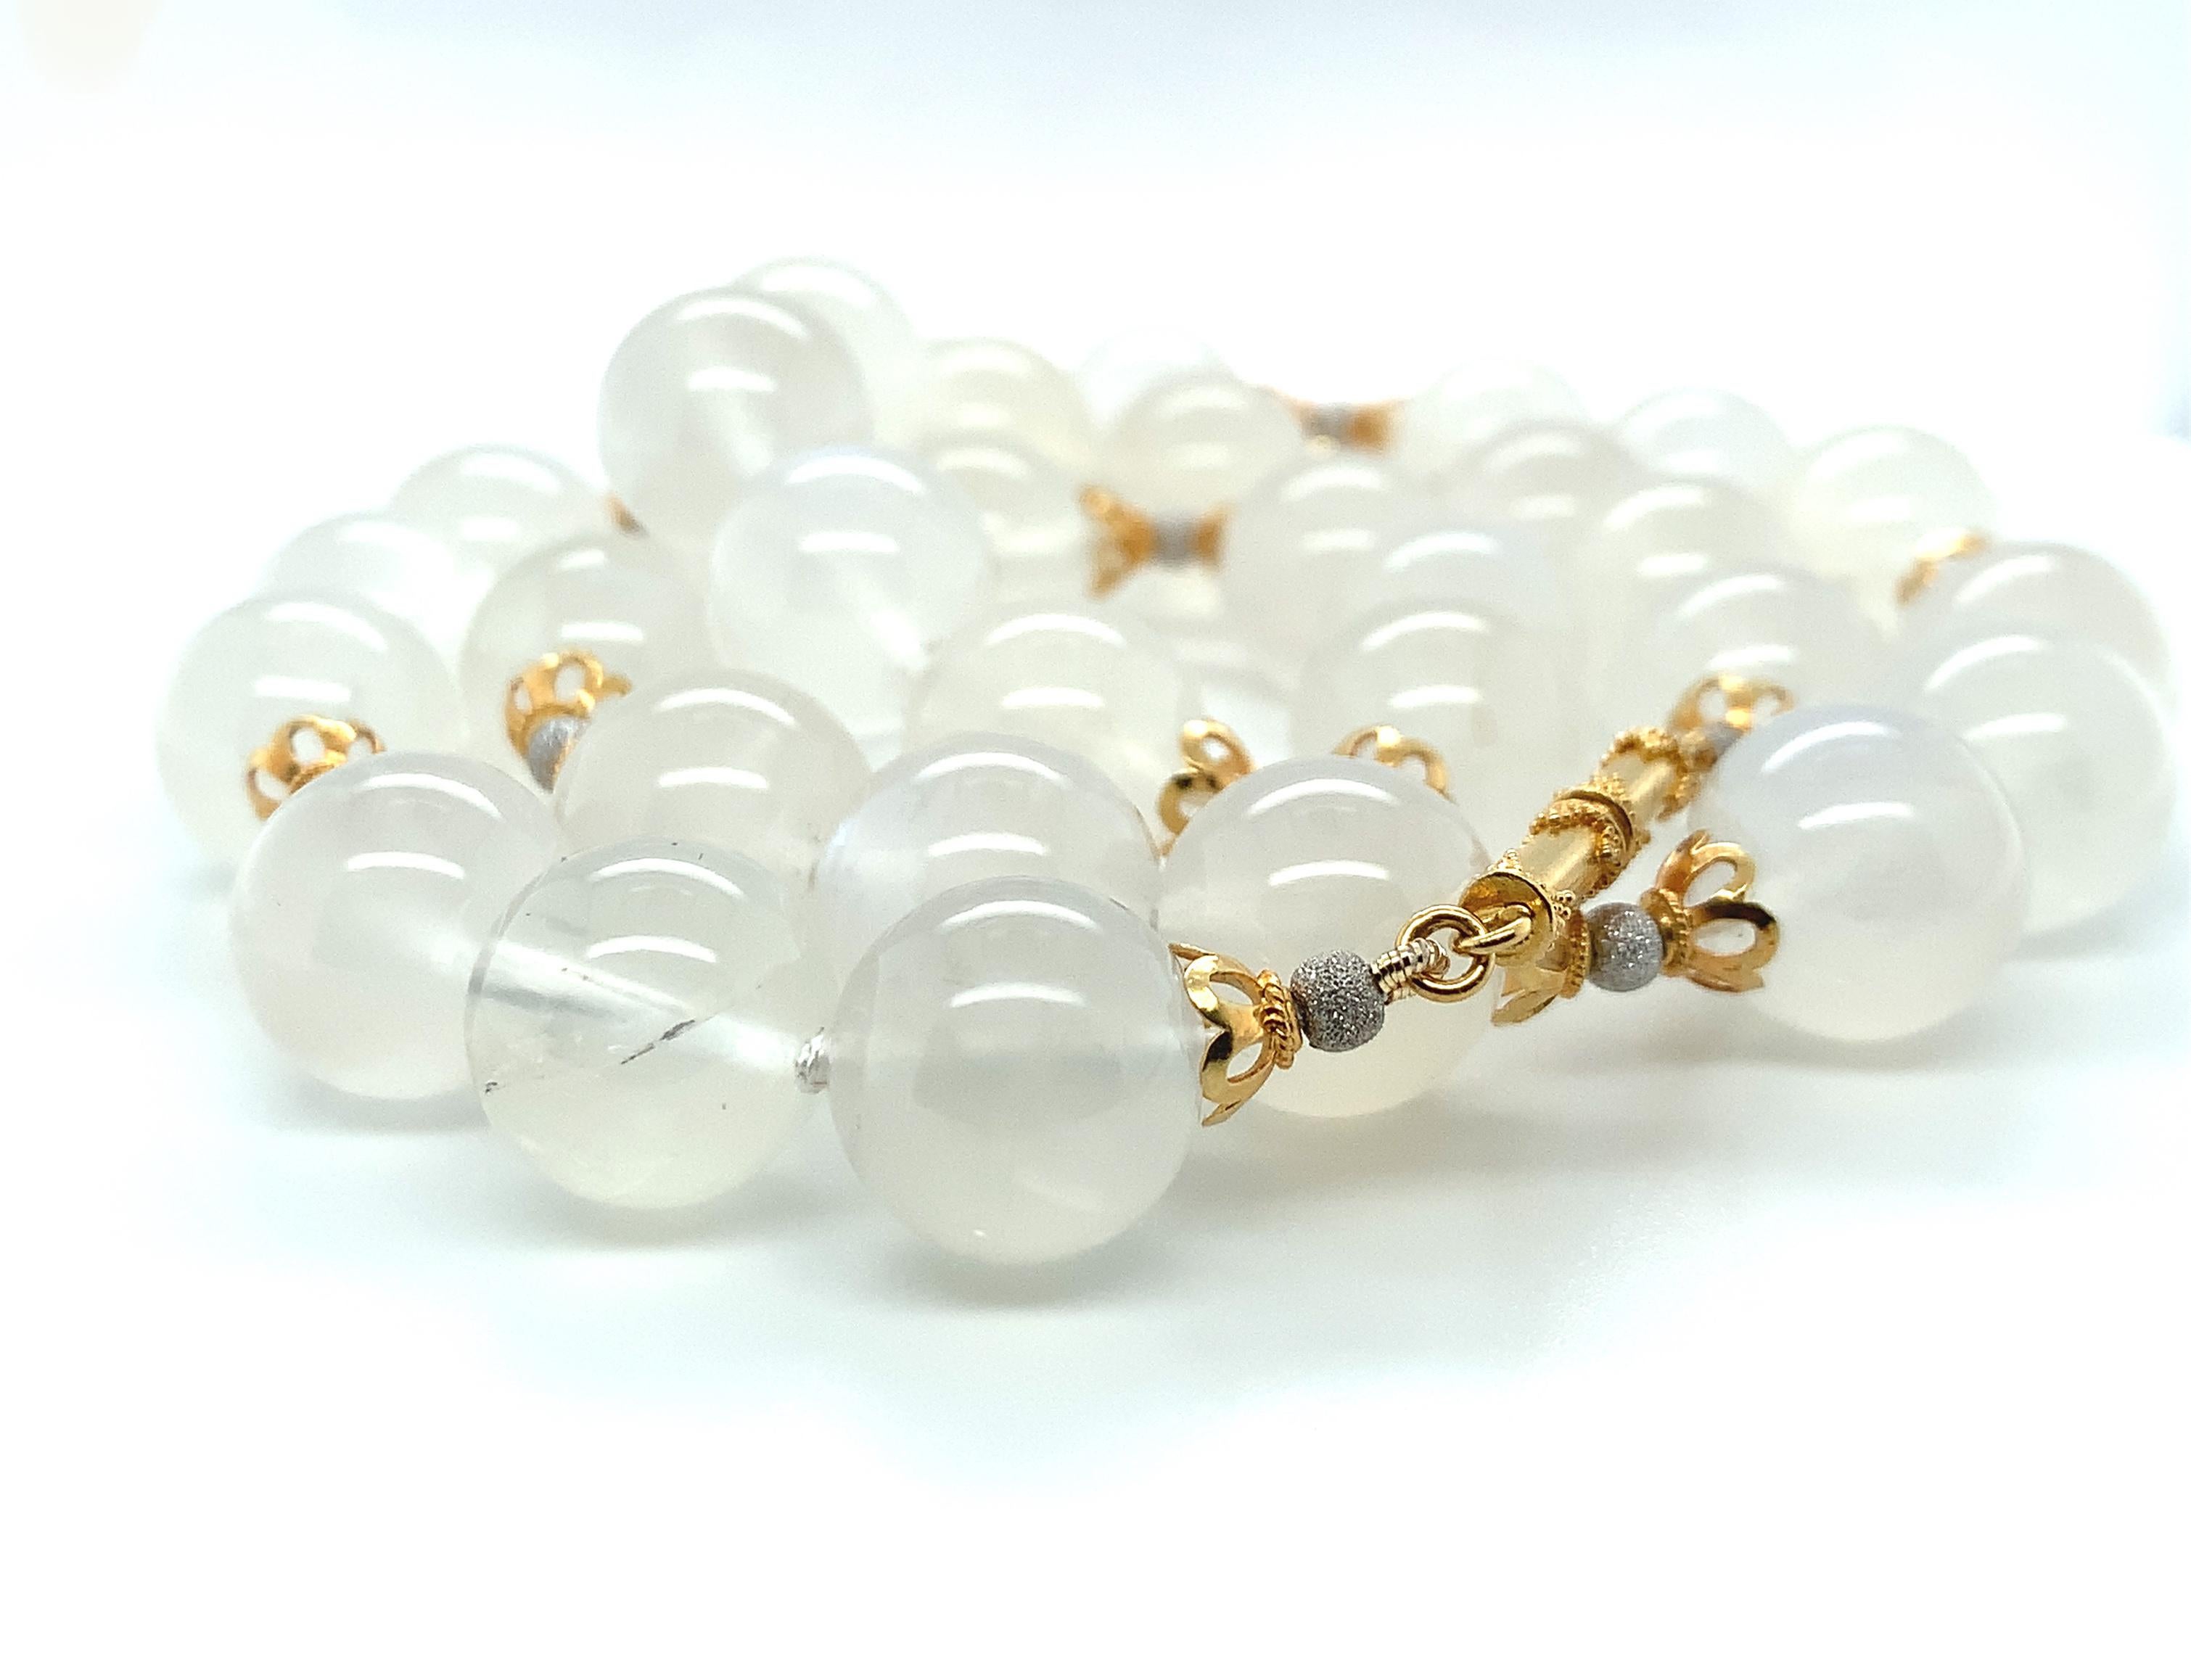 This pretty strand of blue flash moonstone beads will make such a versatile and fresh addition to your jewelry wardrobe! The 12mm beads are beautifully matched and exhibit striking 